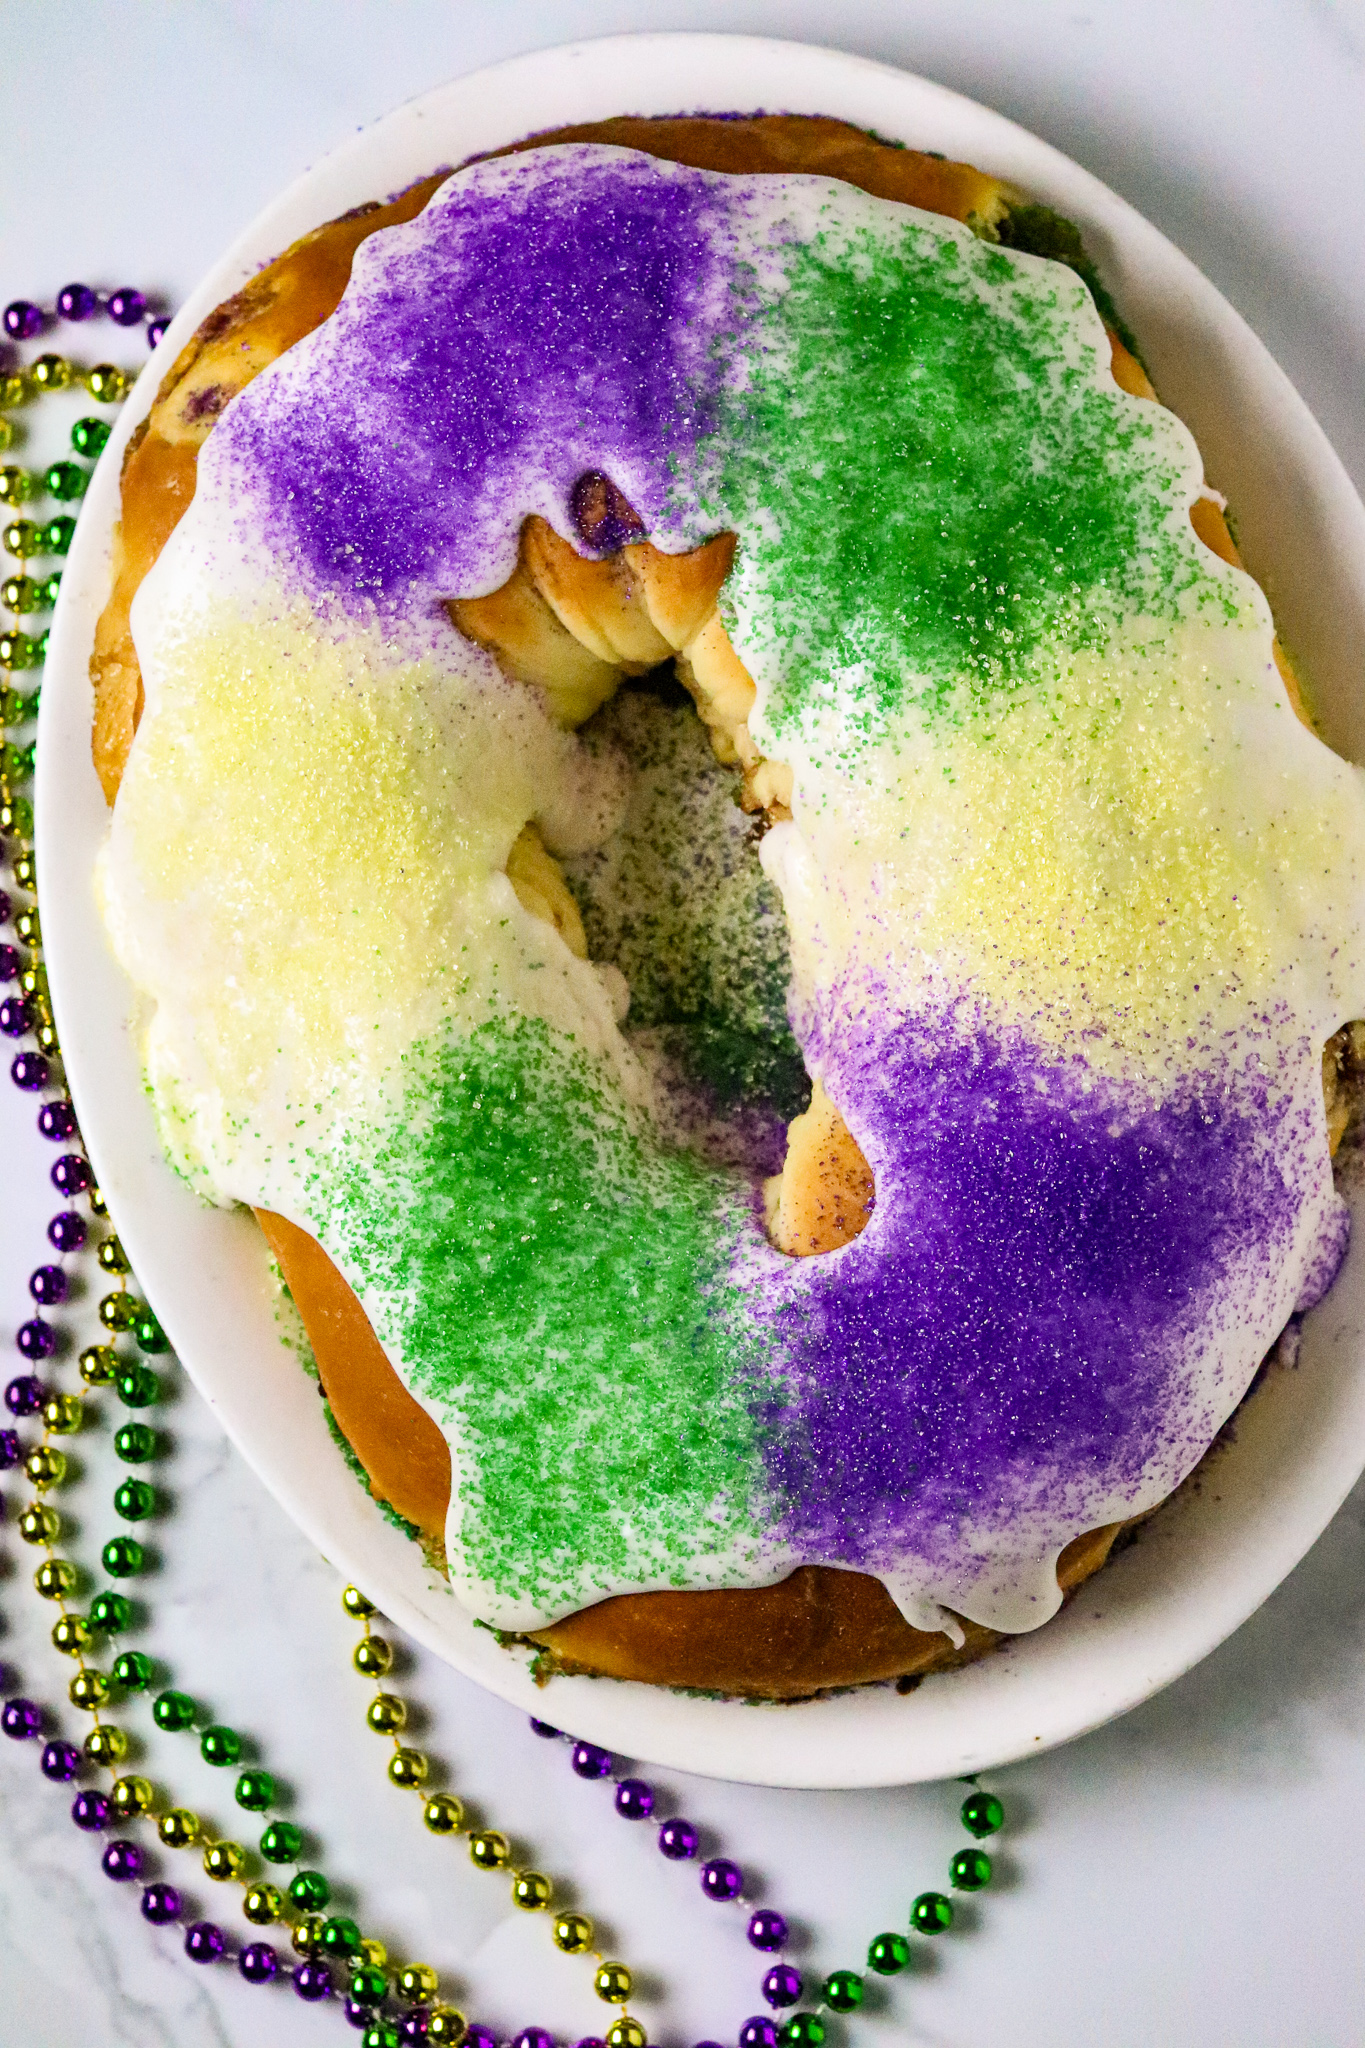 Of Beans and Babes - The Secret History of Beans in King Cakes